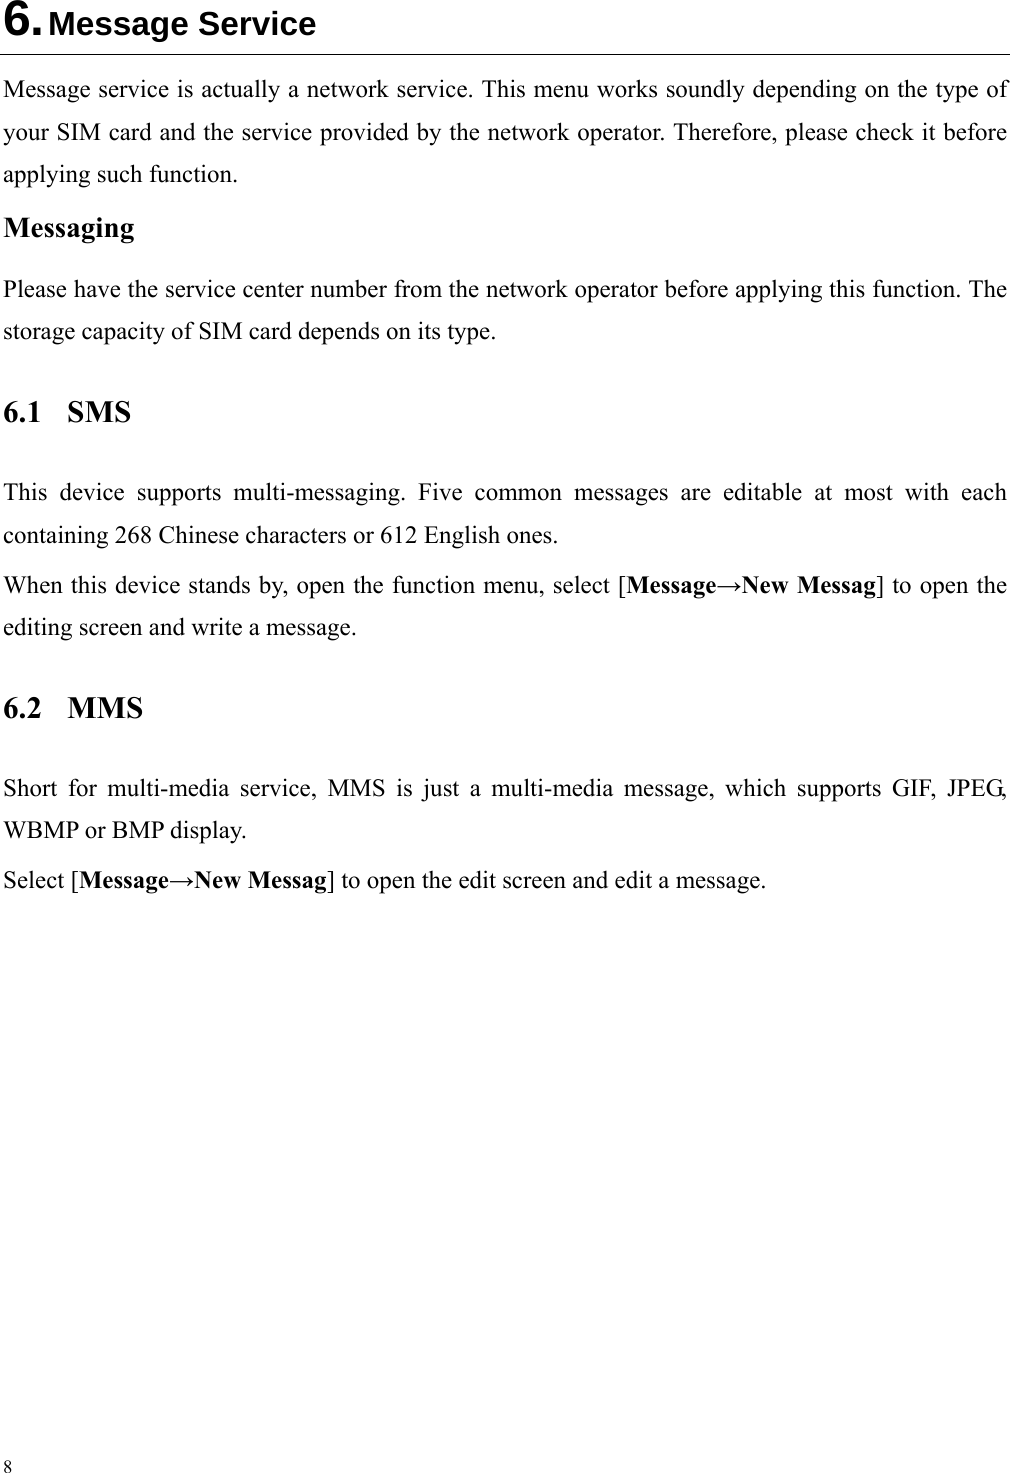 8 6. Message Service Message service is actually a network service. This menu works soundly depending on the type of your SIM card and the service provided by the network operator. Therefore, please check it before applying such function. Messaging Please have the service center number from the network operator before applying this function. The storage capacity of SIM card depends on its type. 6.1 SMS This device supports multi-messaging. Five common messages are editable at most with each containing 268 Chinese characters or 612 English ones. When this device stands by, open the function menu, select [Message→New Messag] to open the editing screen and write a message. 6.2 MMS Short for multi-media service, MMS is just a multi-media message, which supports GIF, JPEG, WBMP or BMP display. Select [Message→New Messag] to open the edit screen and edit a message. 